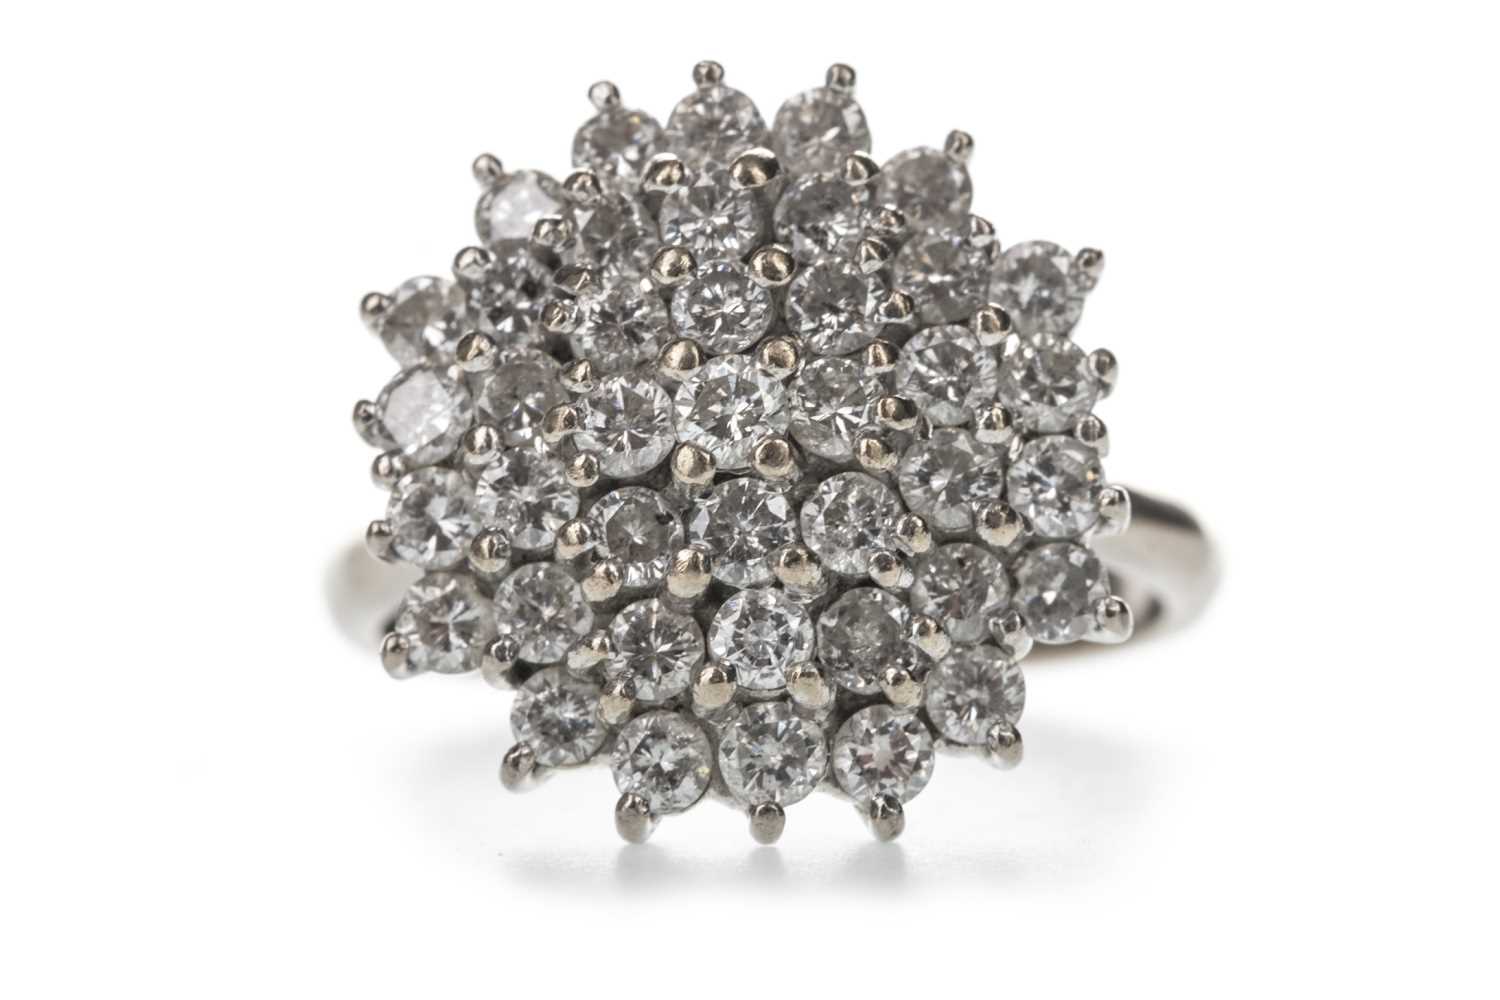 Lot 343 - A DIAMOND CLUSTER RING